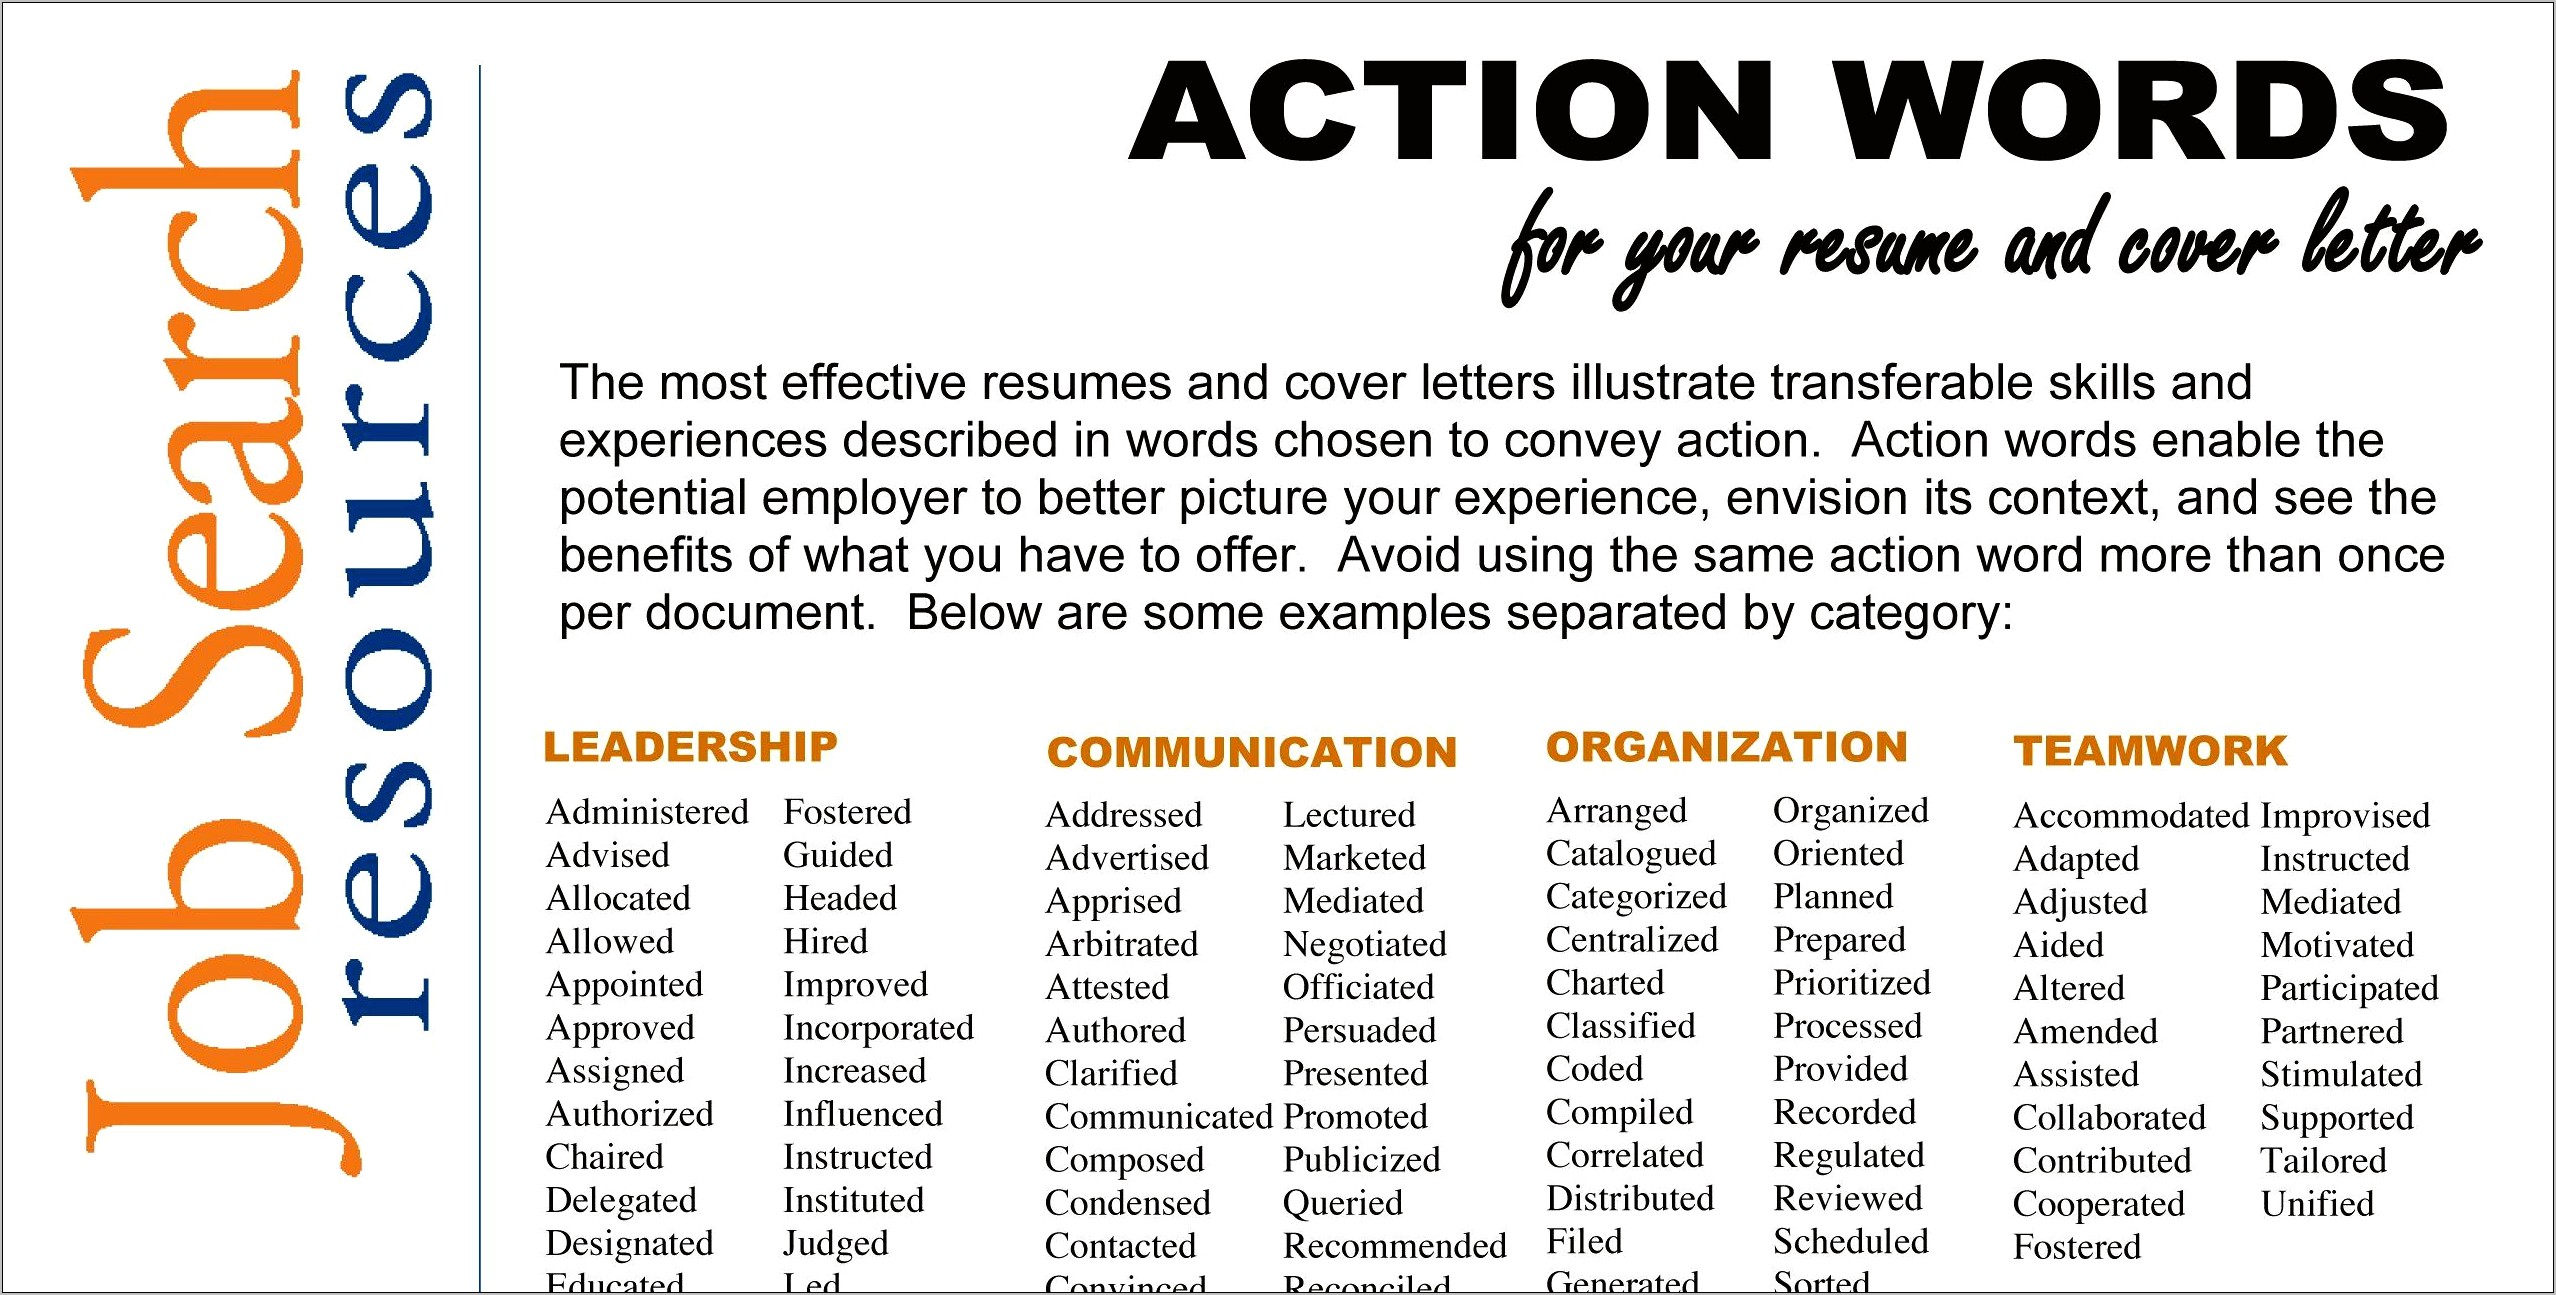 Action Words For Resumes By Category